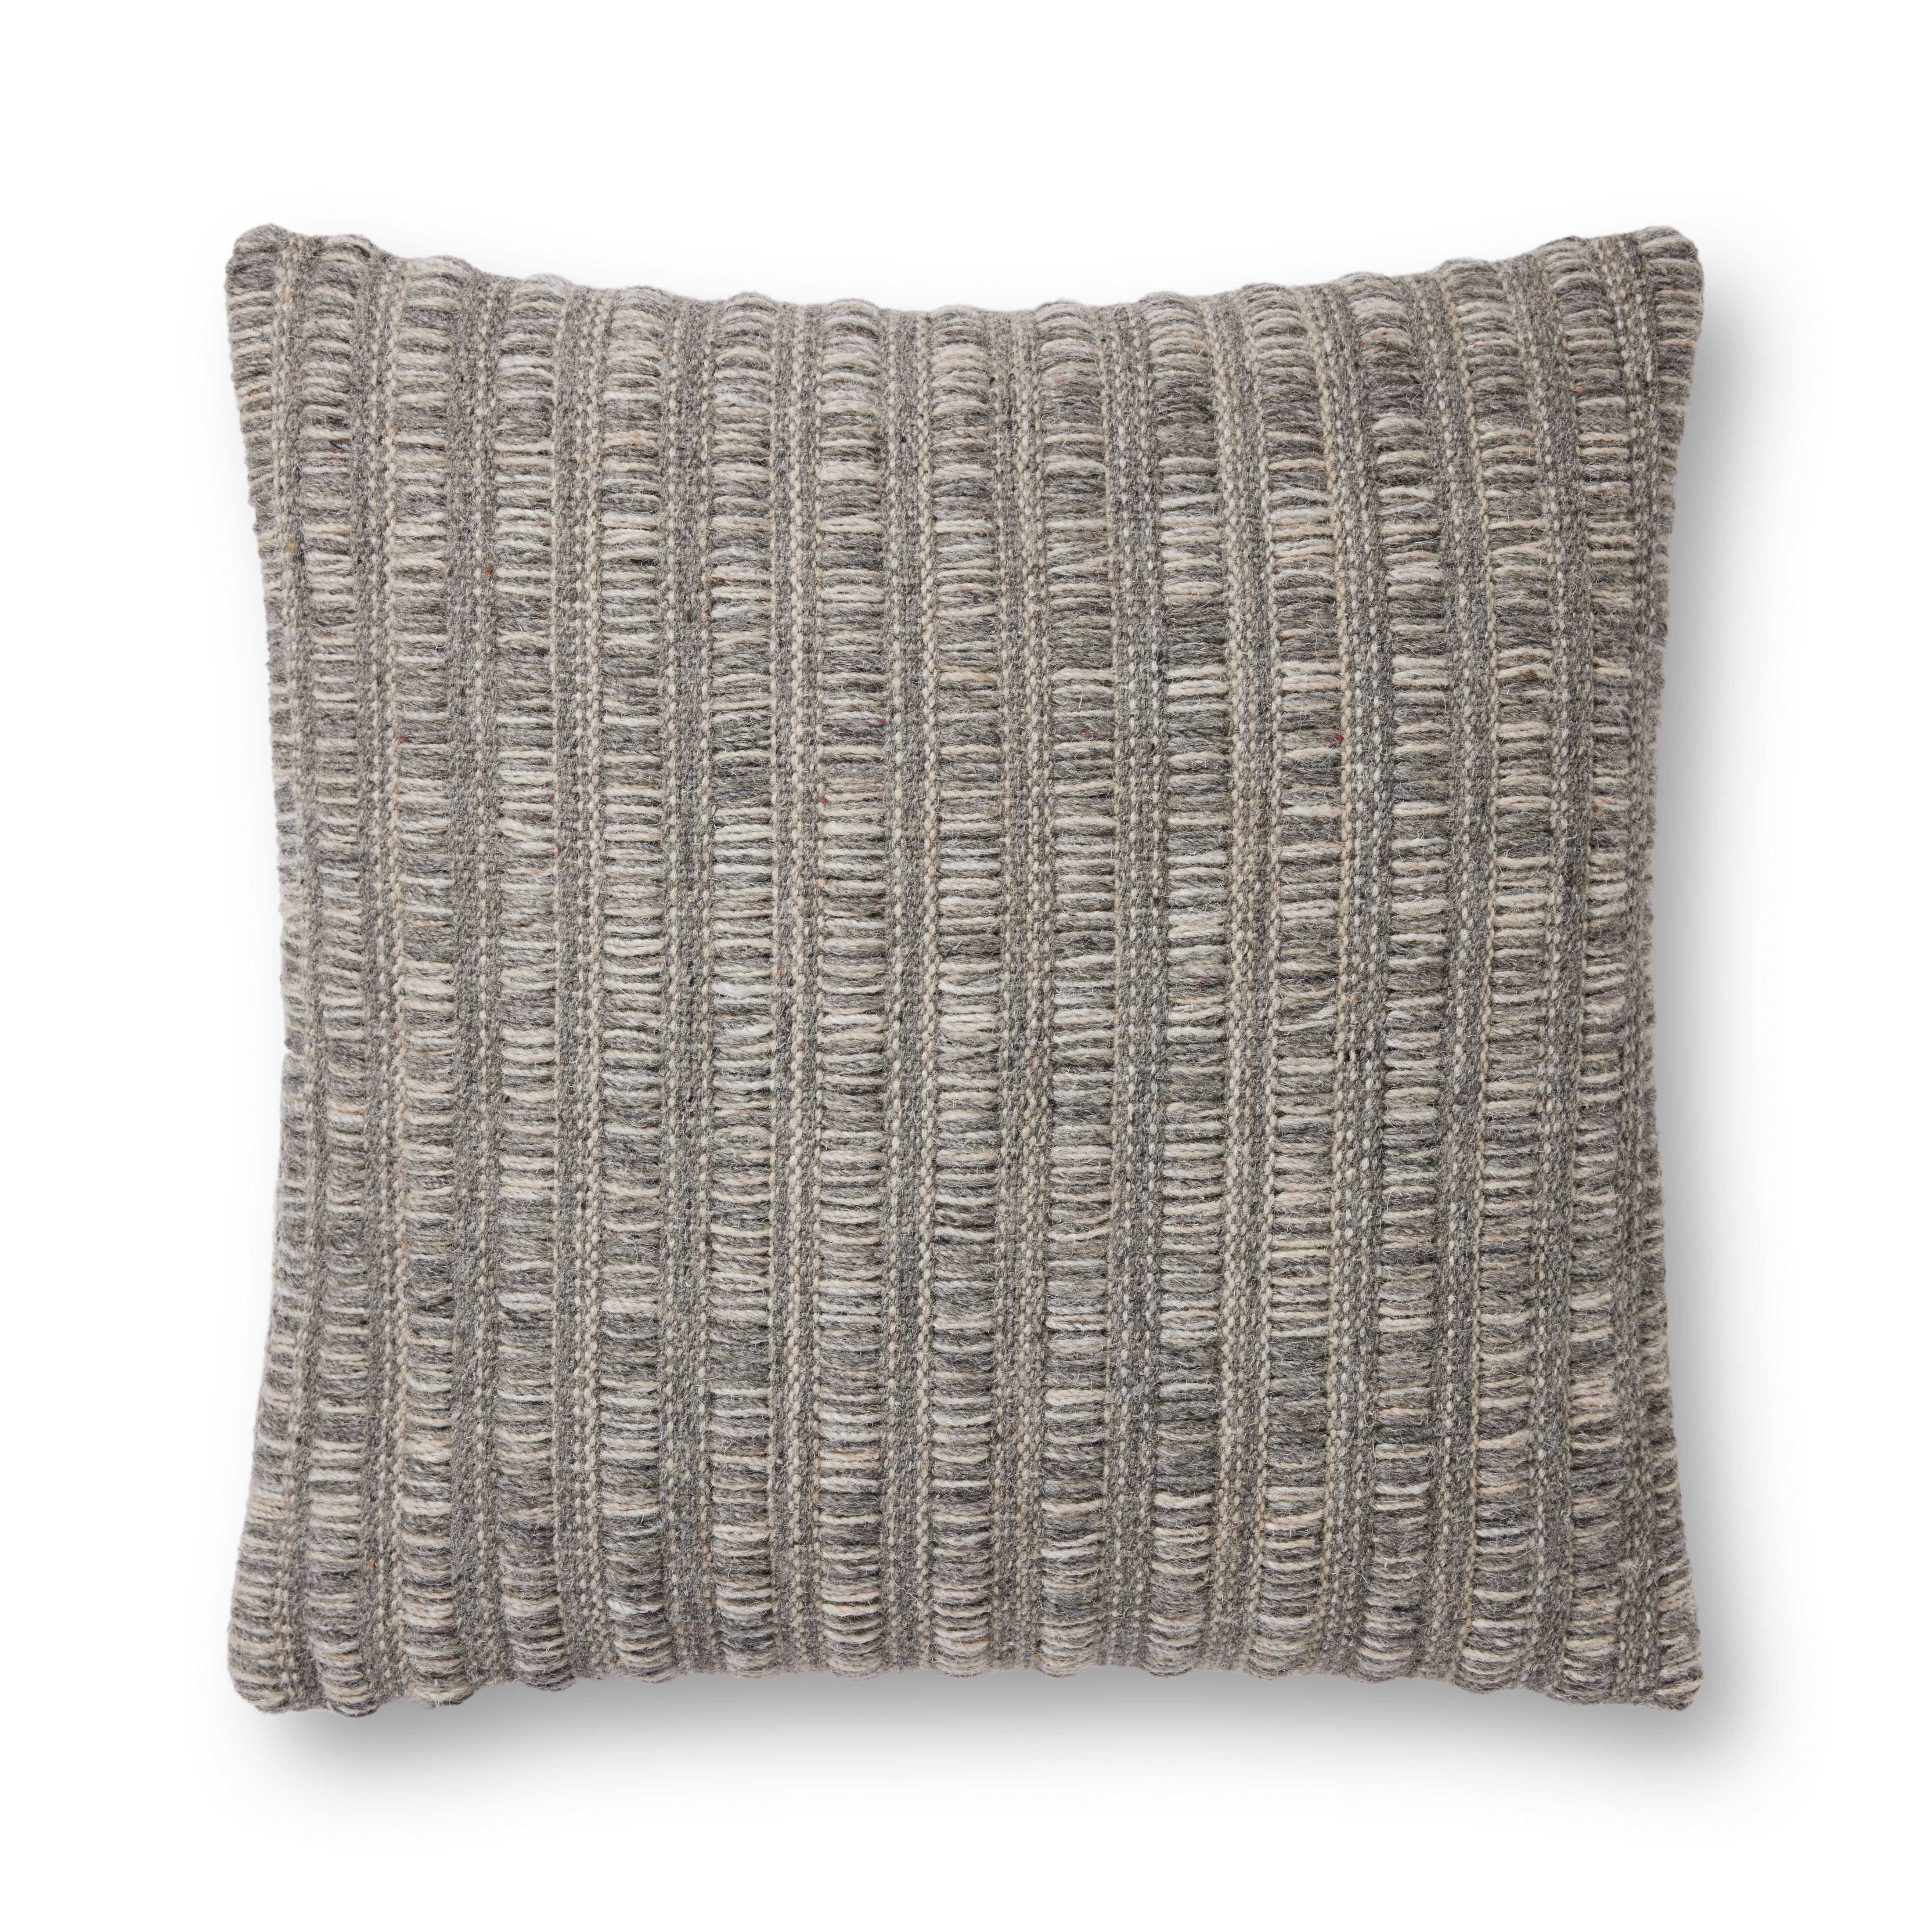 Amber Lewis x Loloi Kit Grey / Natural Pillow | Eco Chic Home